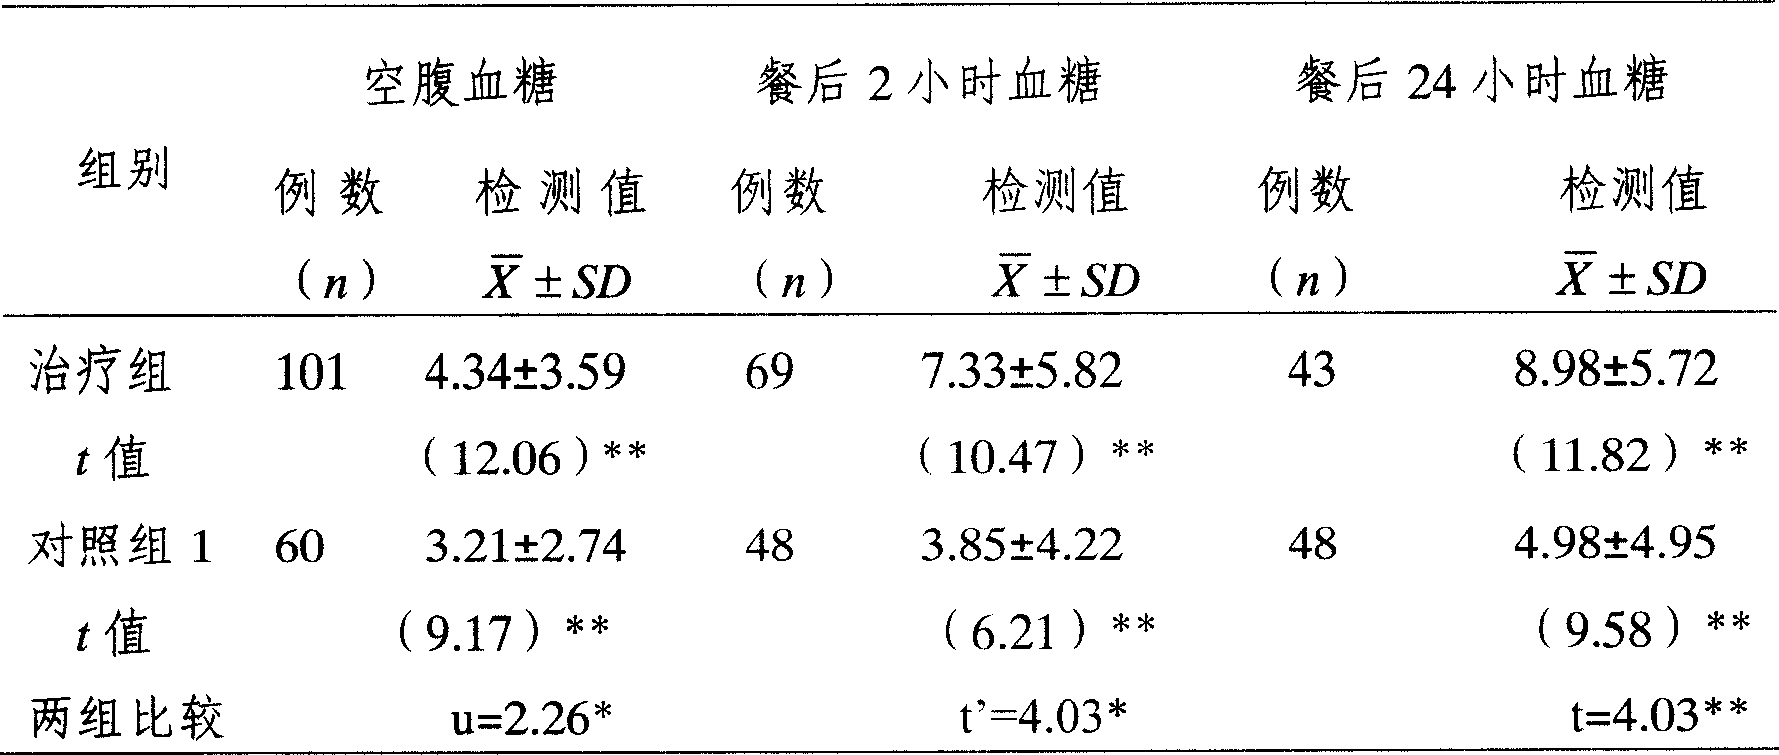 Composition of Chinese traditional medicine for treating diabetes, and preparation method